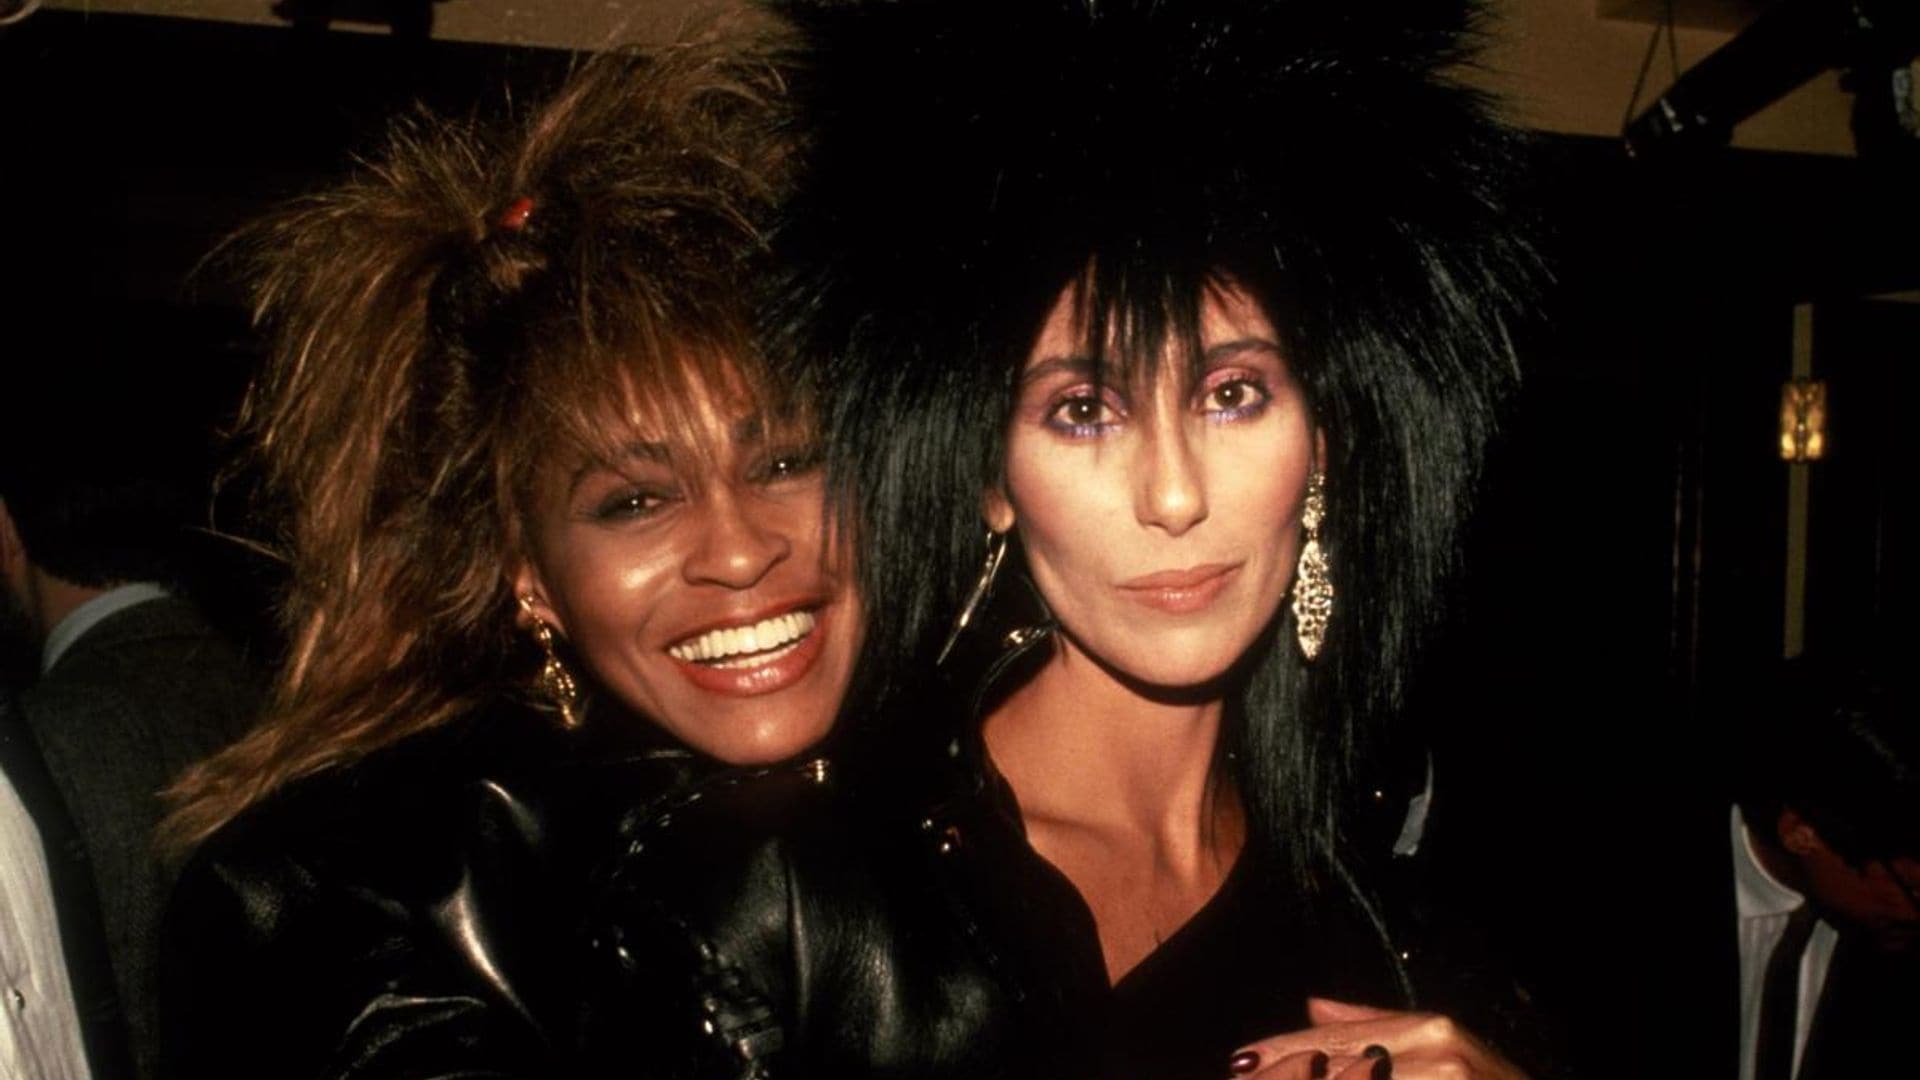 Cher’s friendship with Tina Turner amid health struggles: ‘She was so strong’